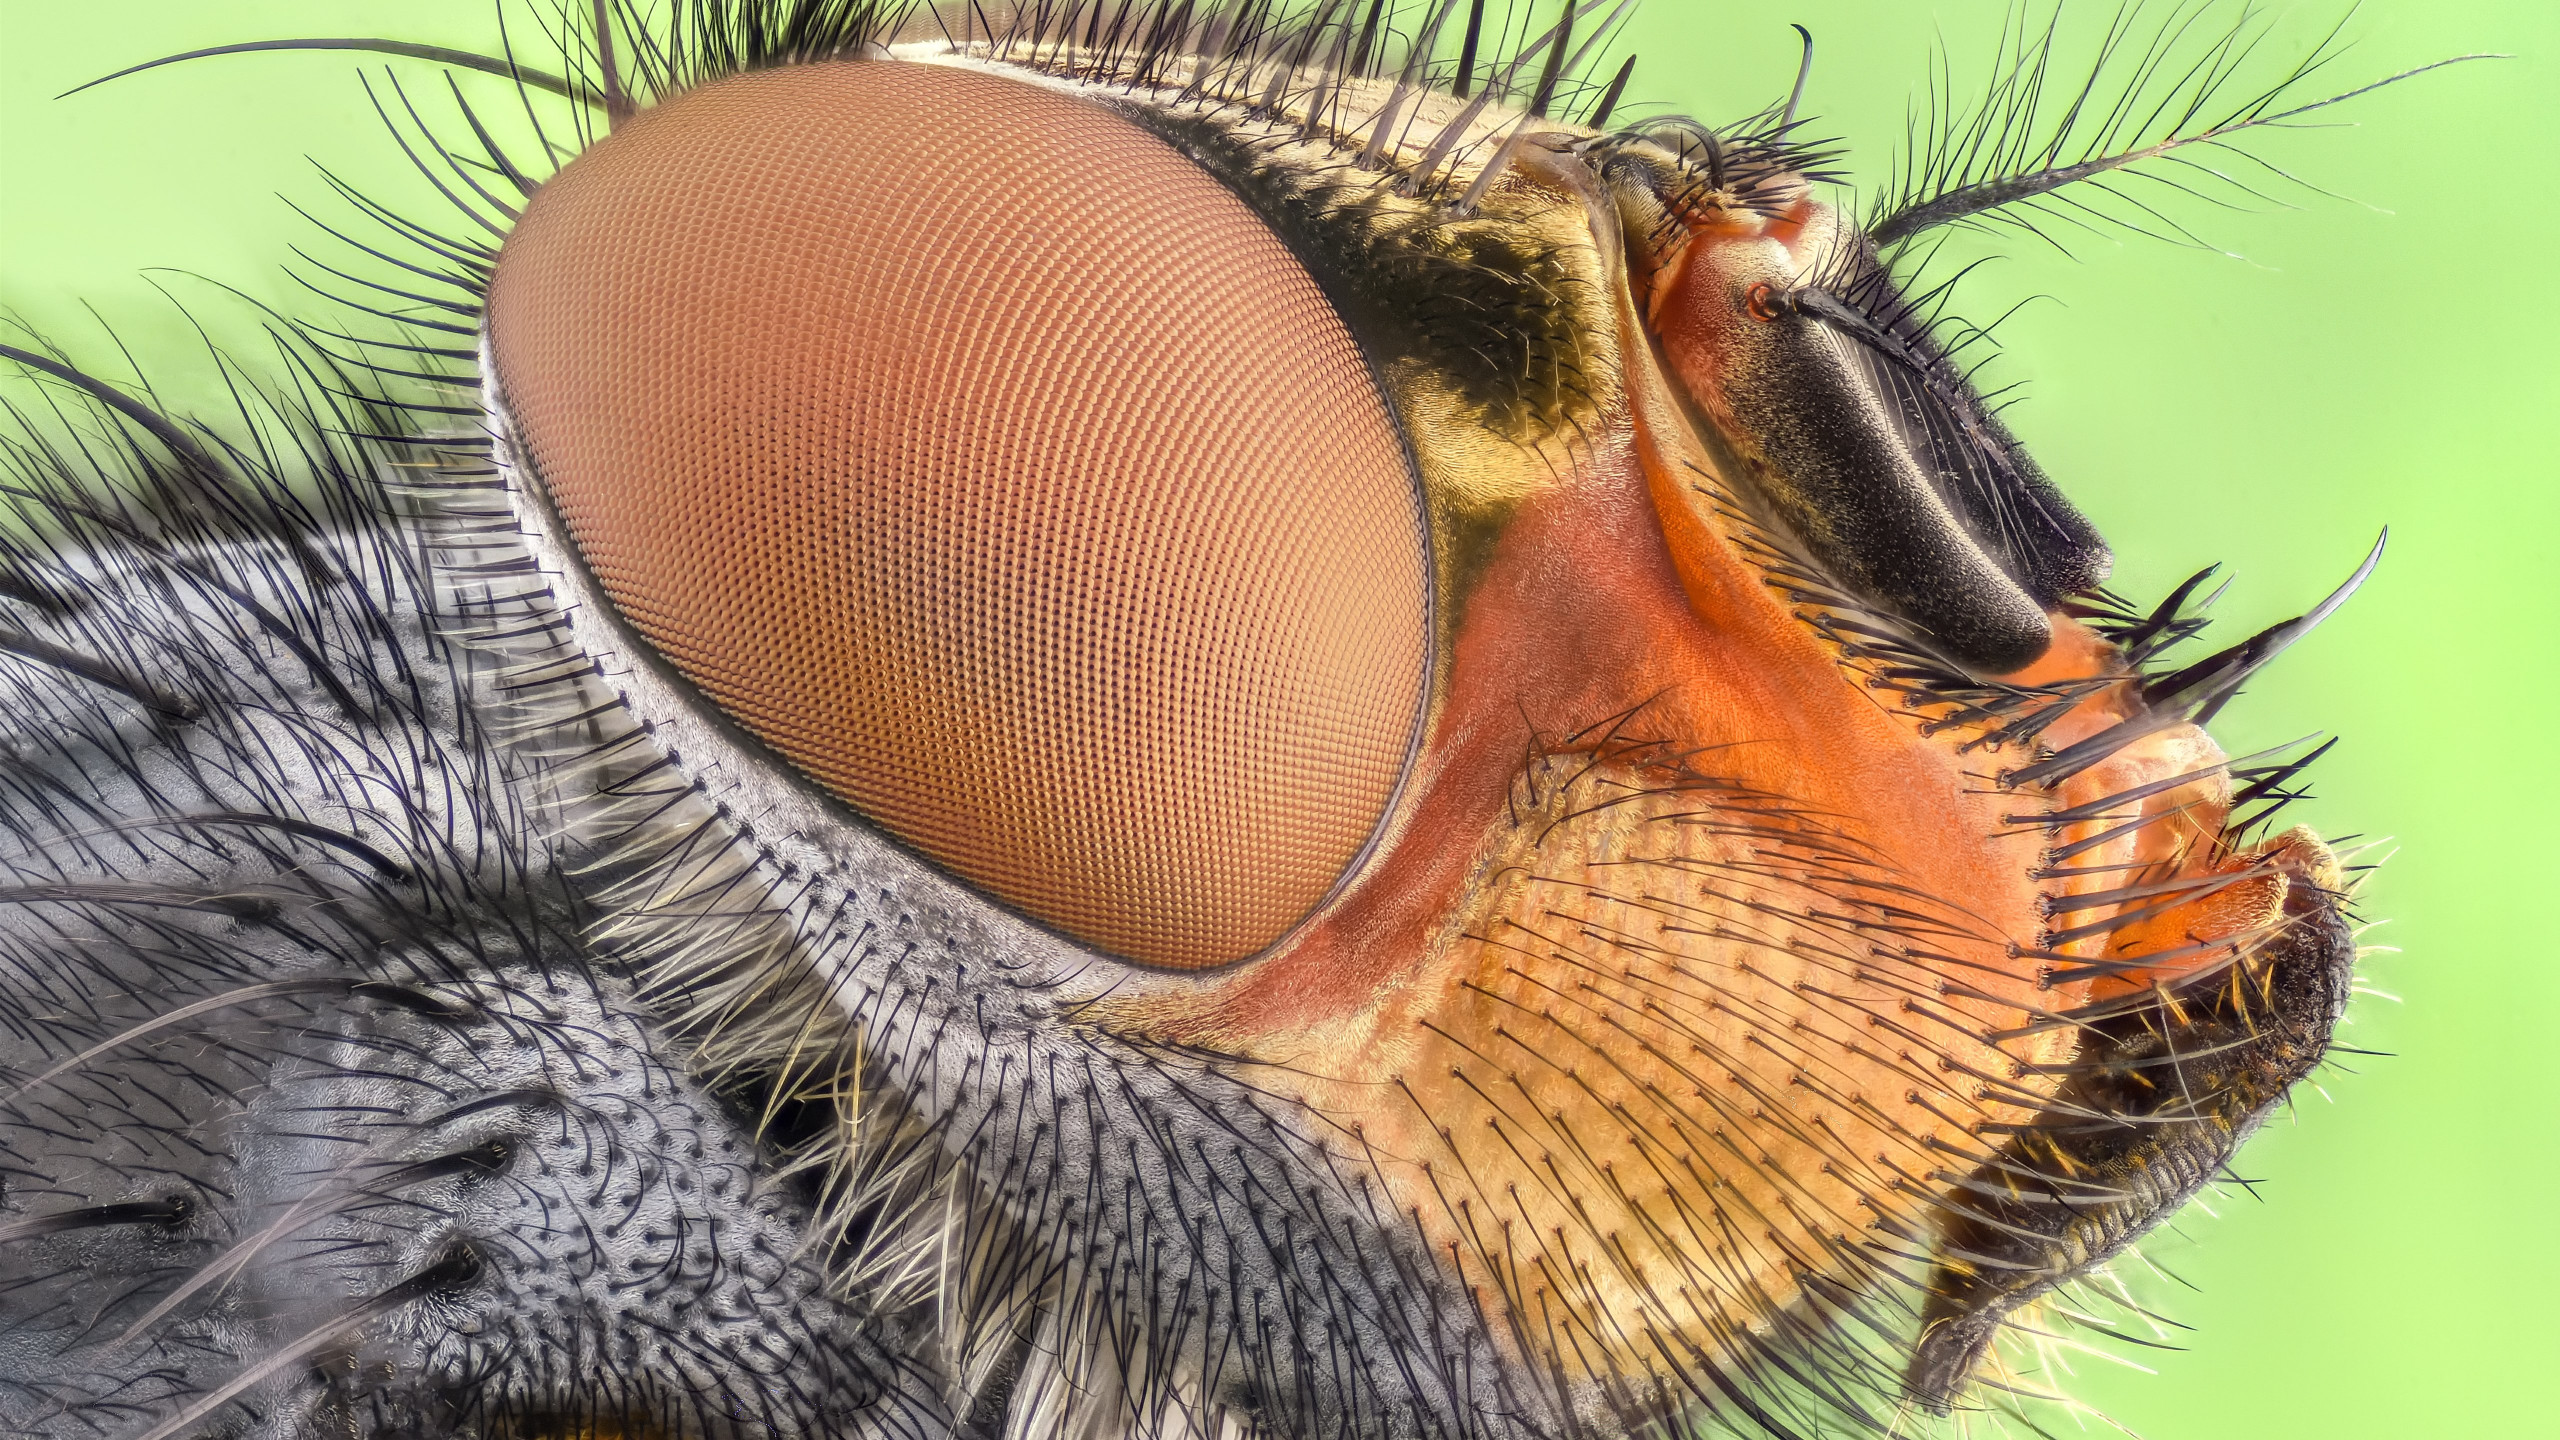 Close up insect portrait wallpaper 2560x1440